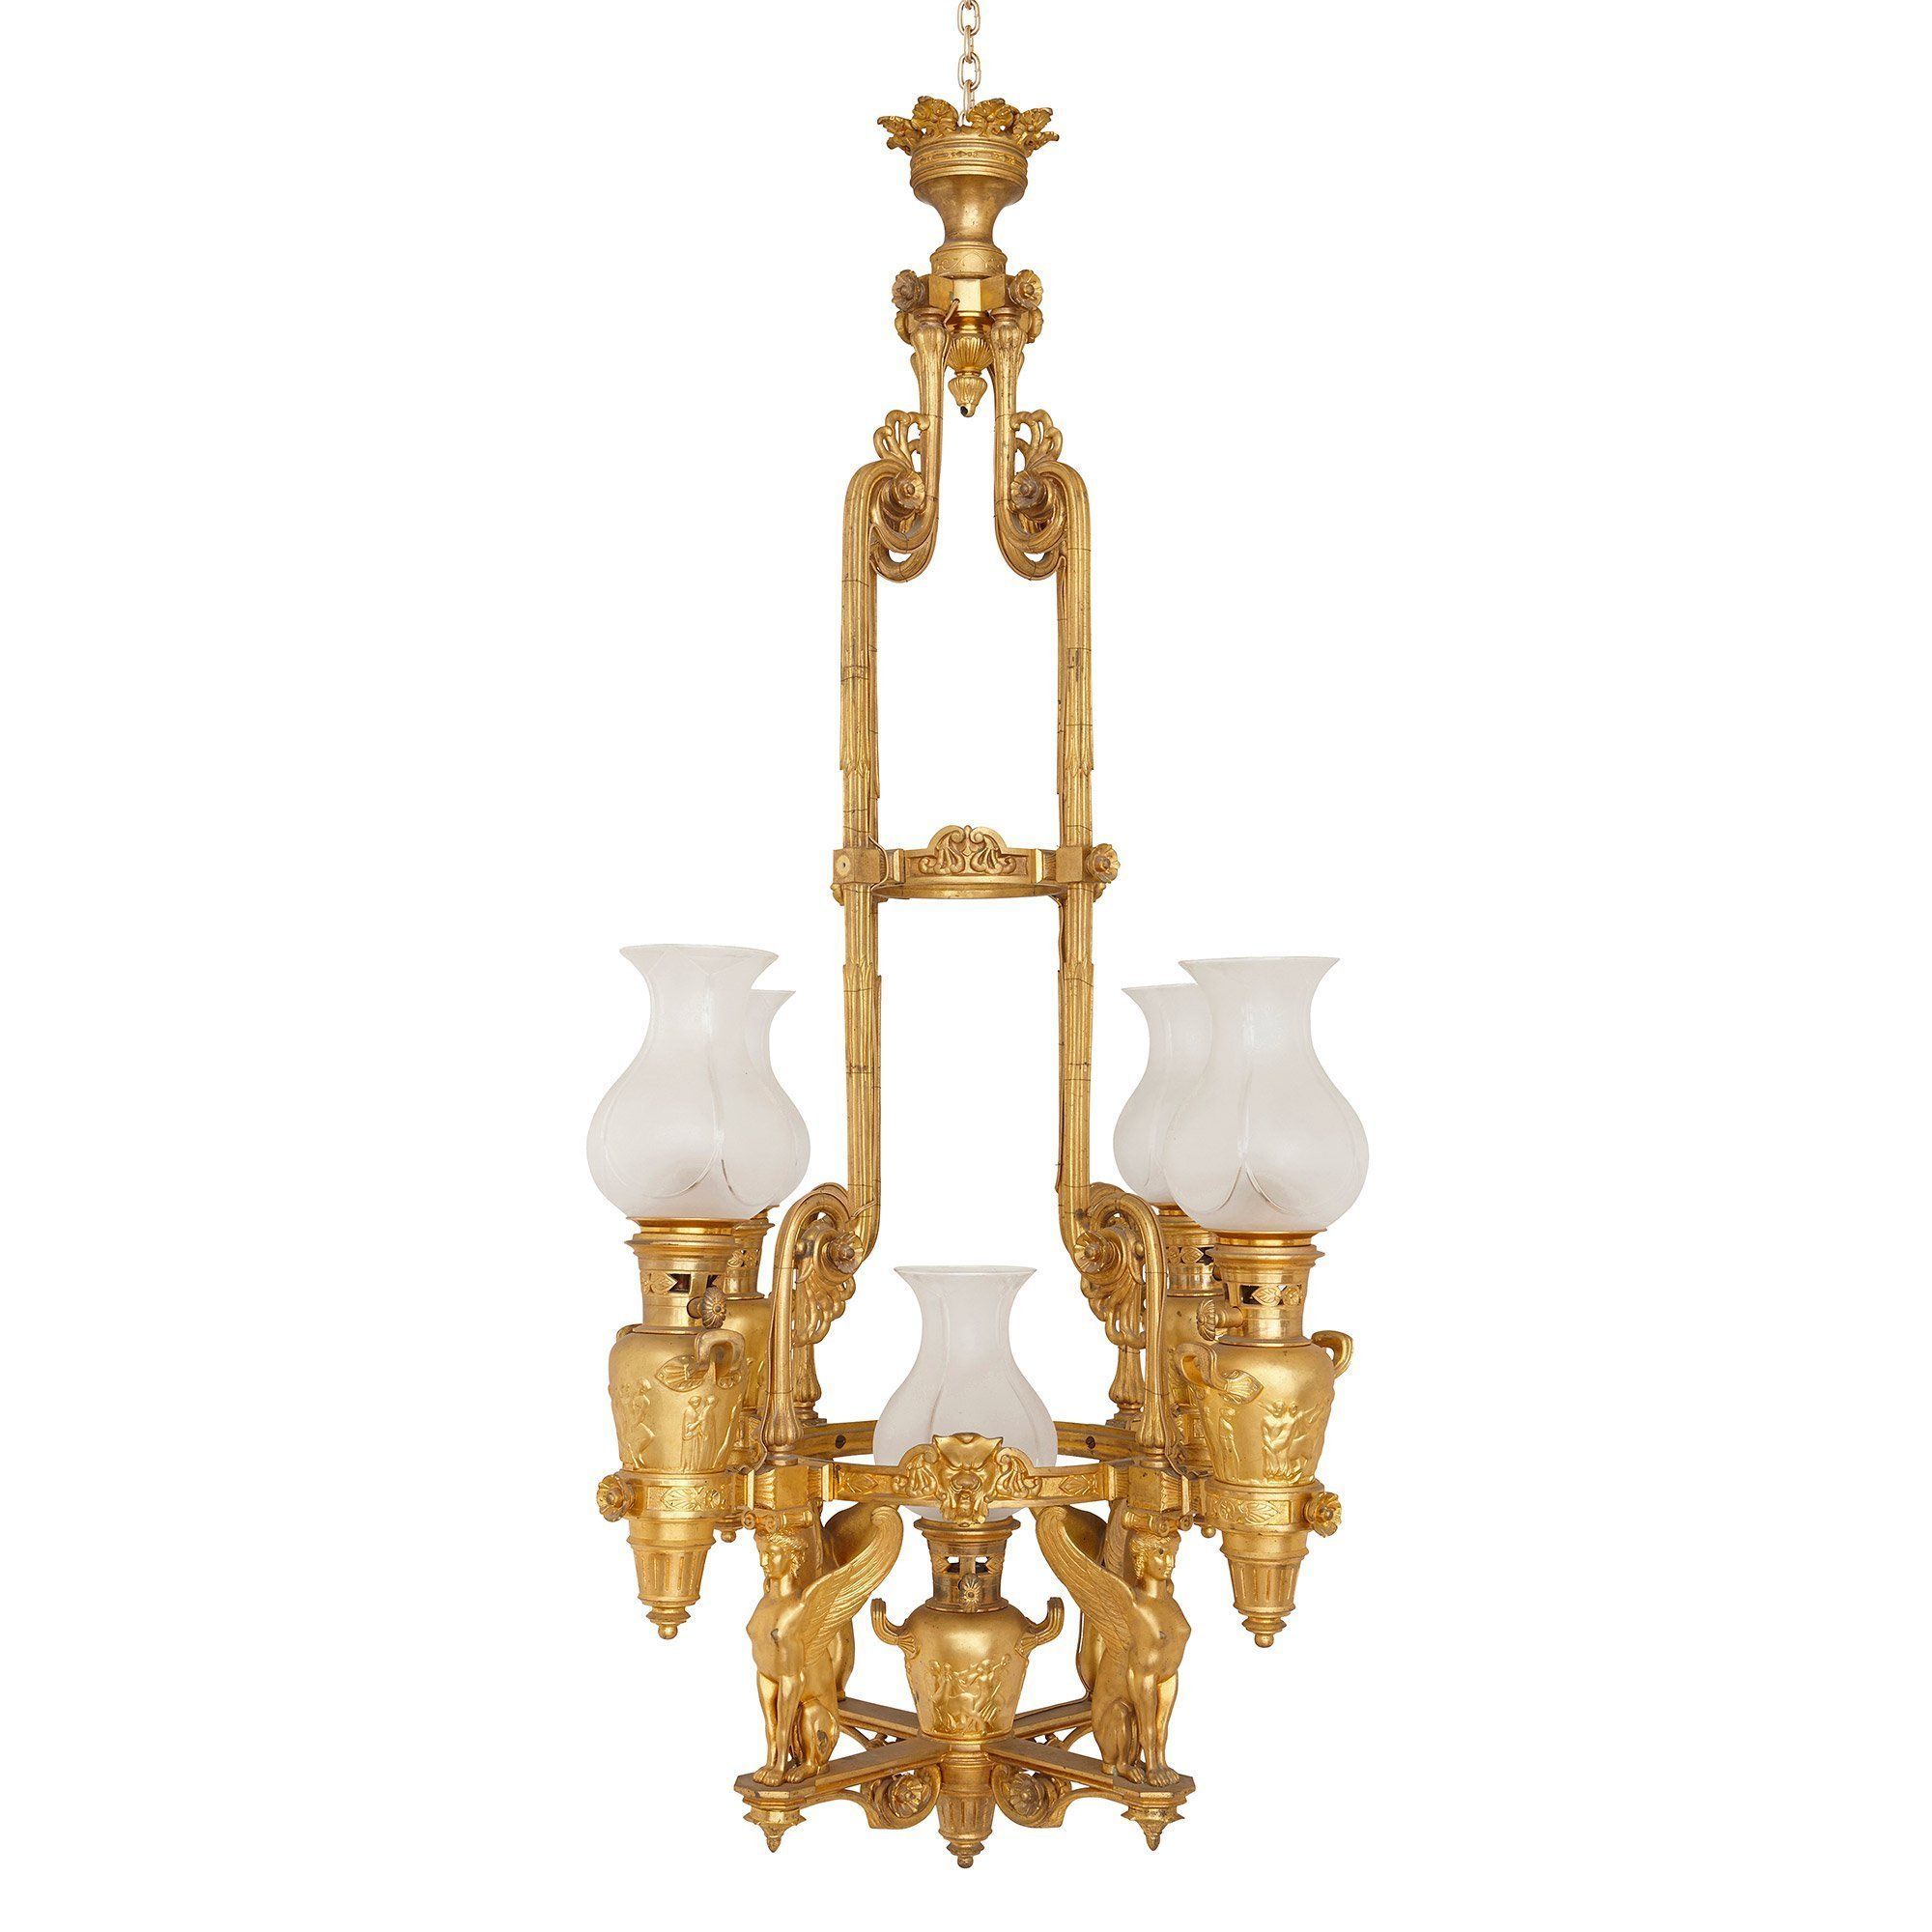 Antique French Empire Style Ormolu Chandelier | Bronze Intended For Roman Bronze And Crystal Chandeliers (View 14 of 15)